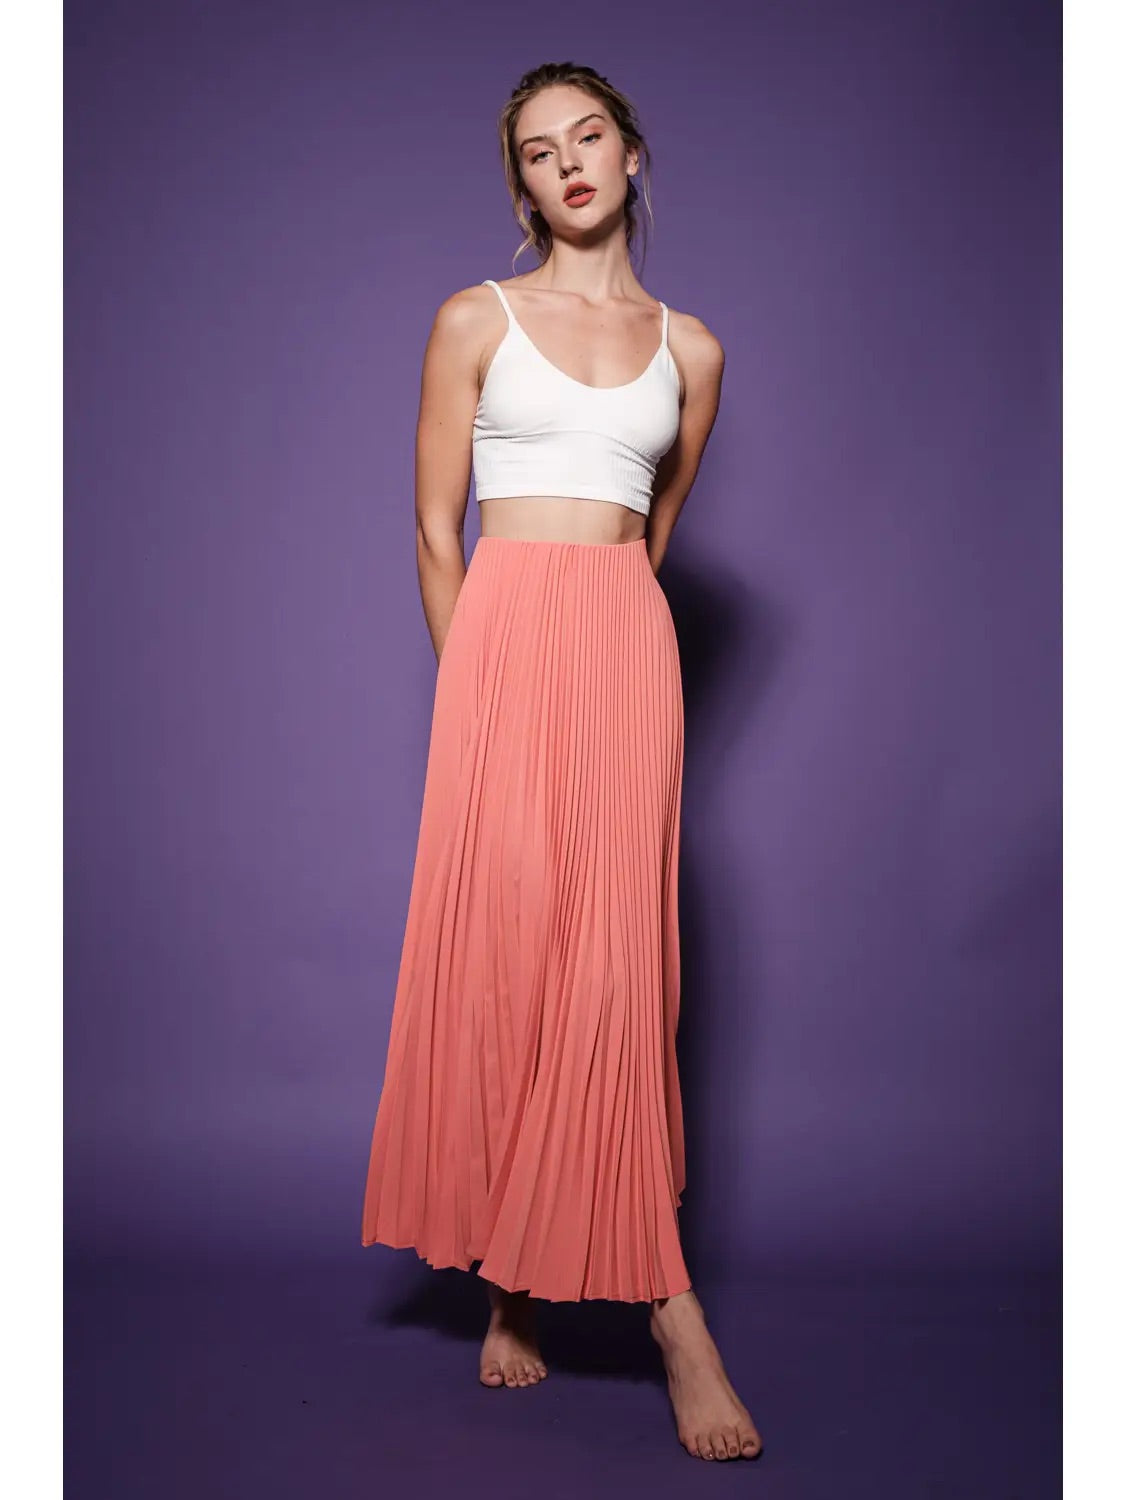 Coral sands maxi skirt